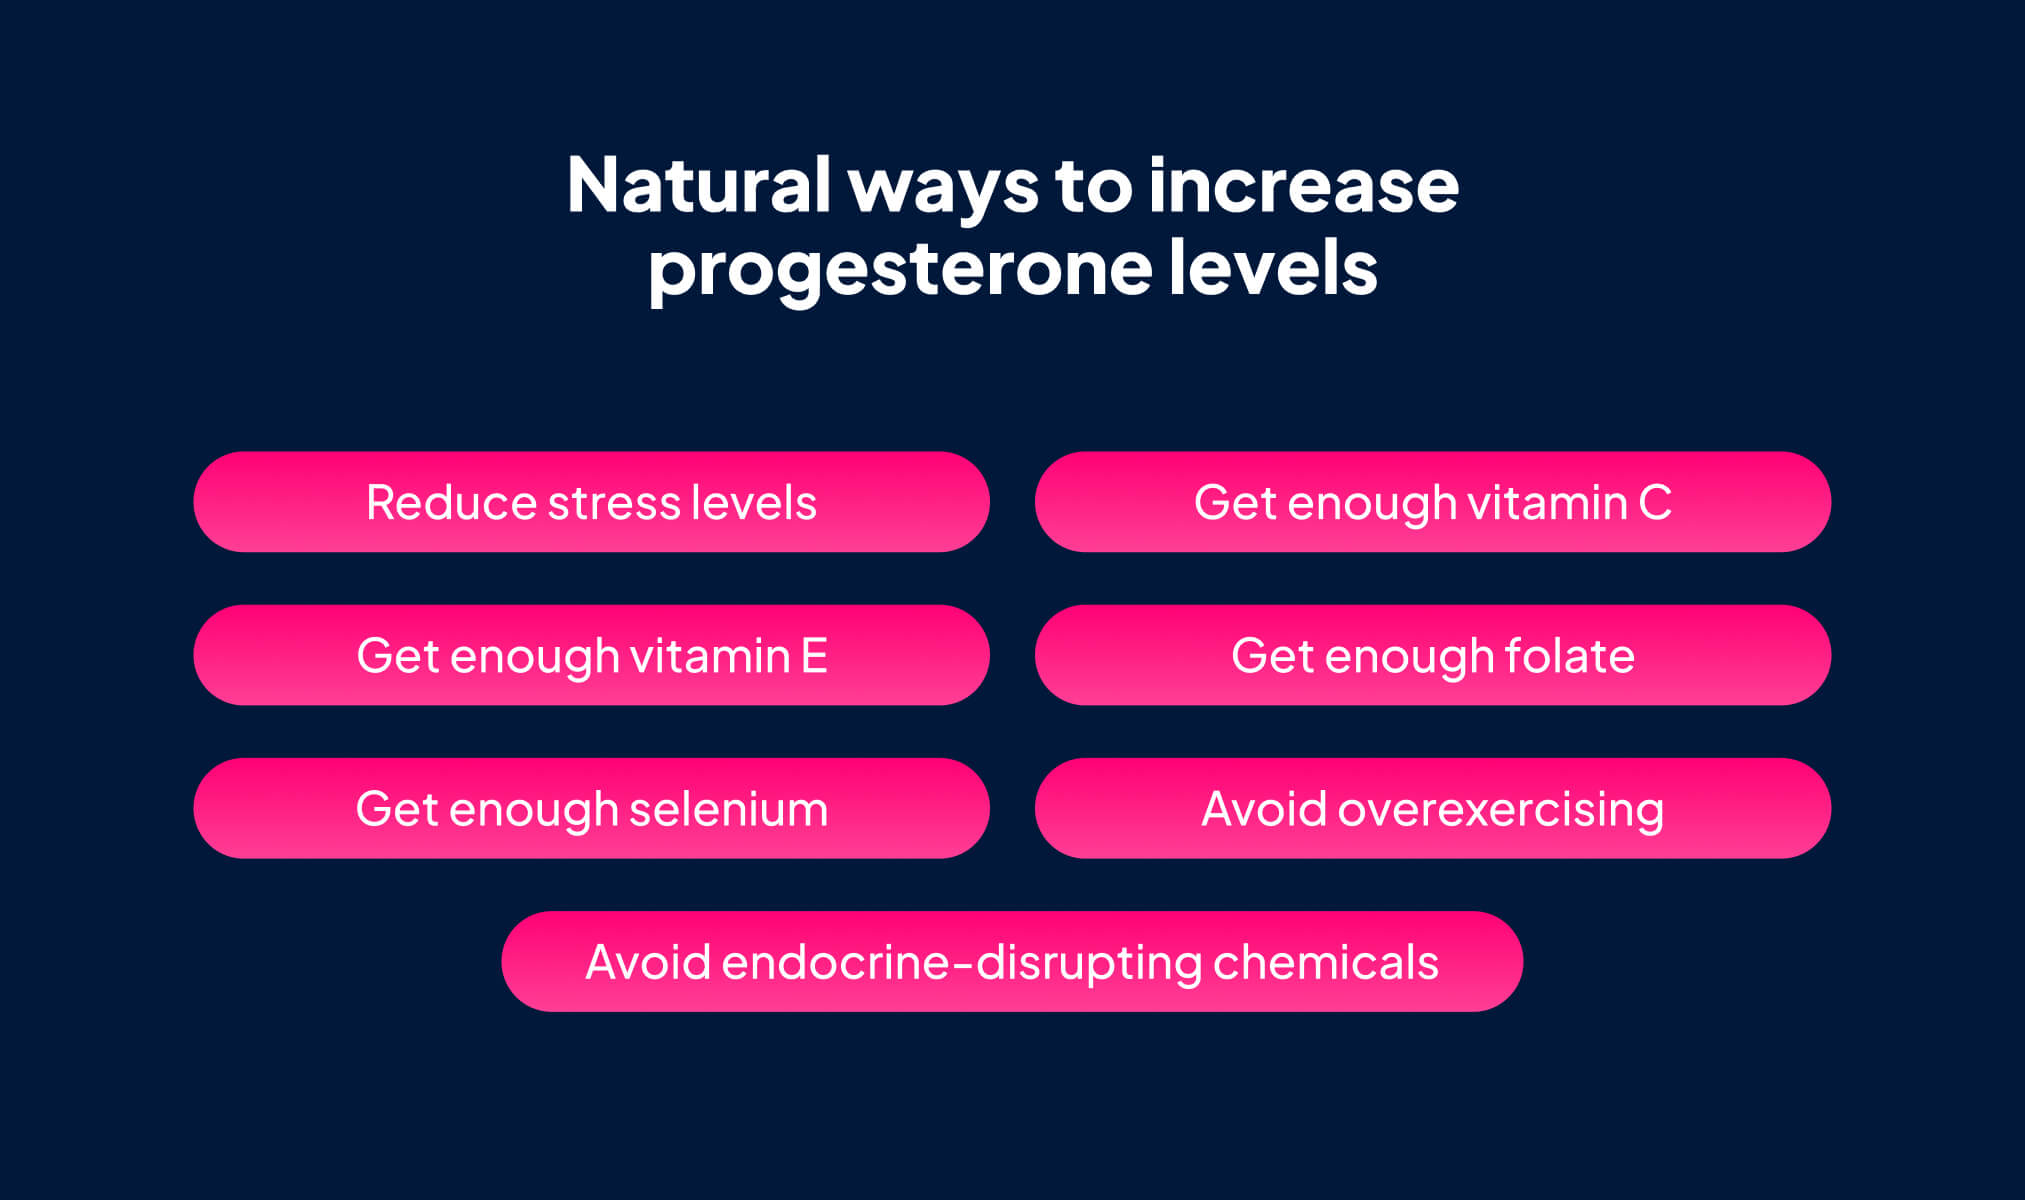 Natural ways to increase progesterone levels